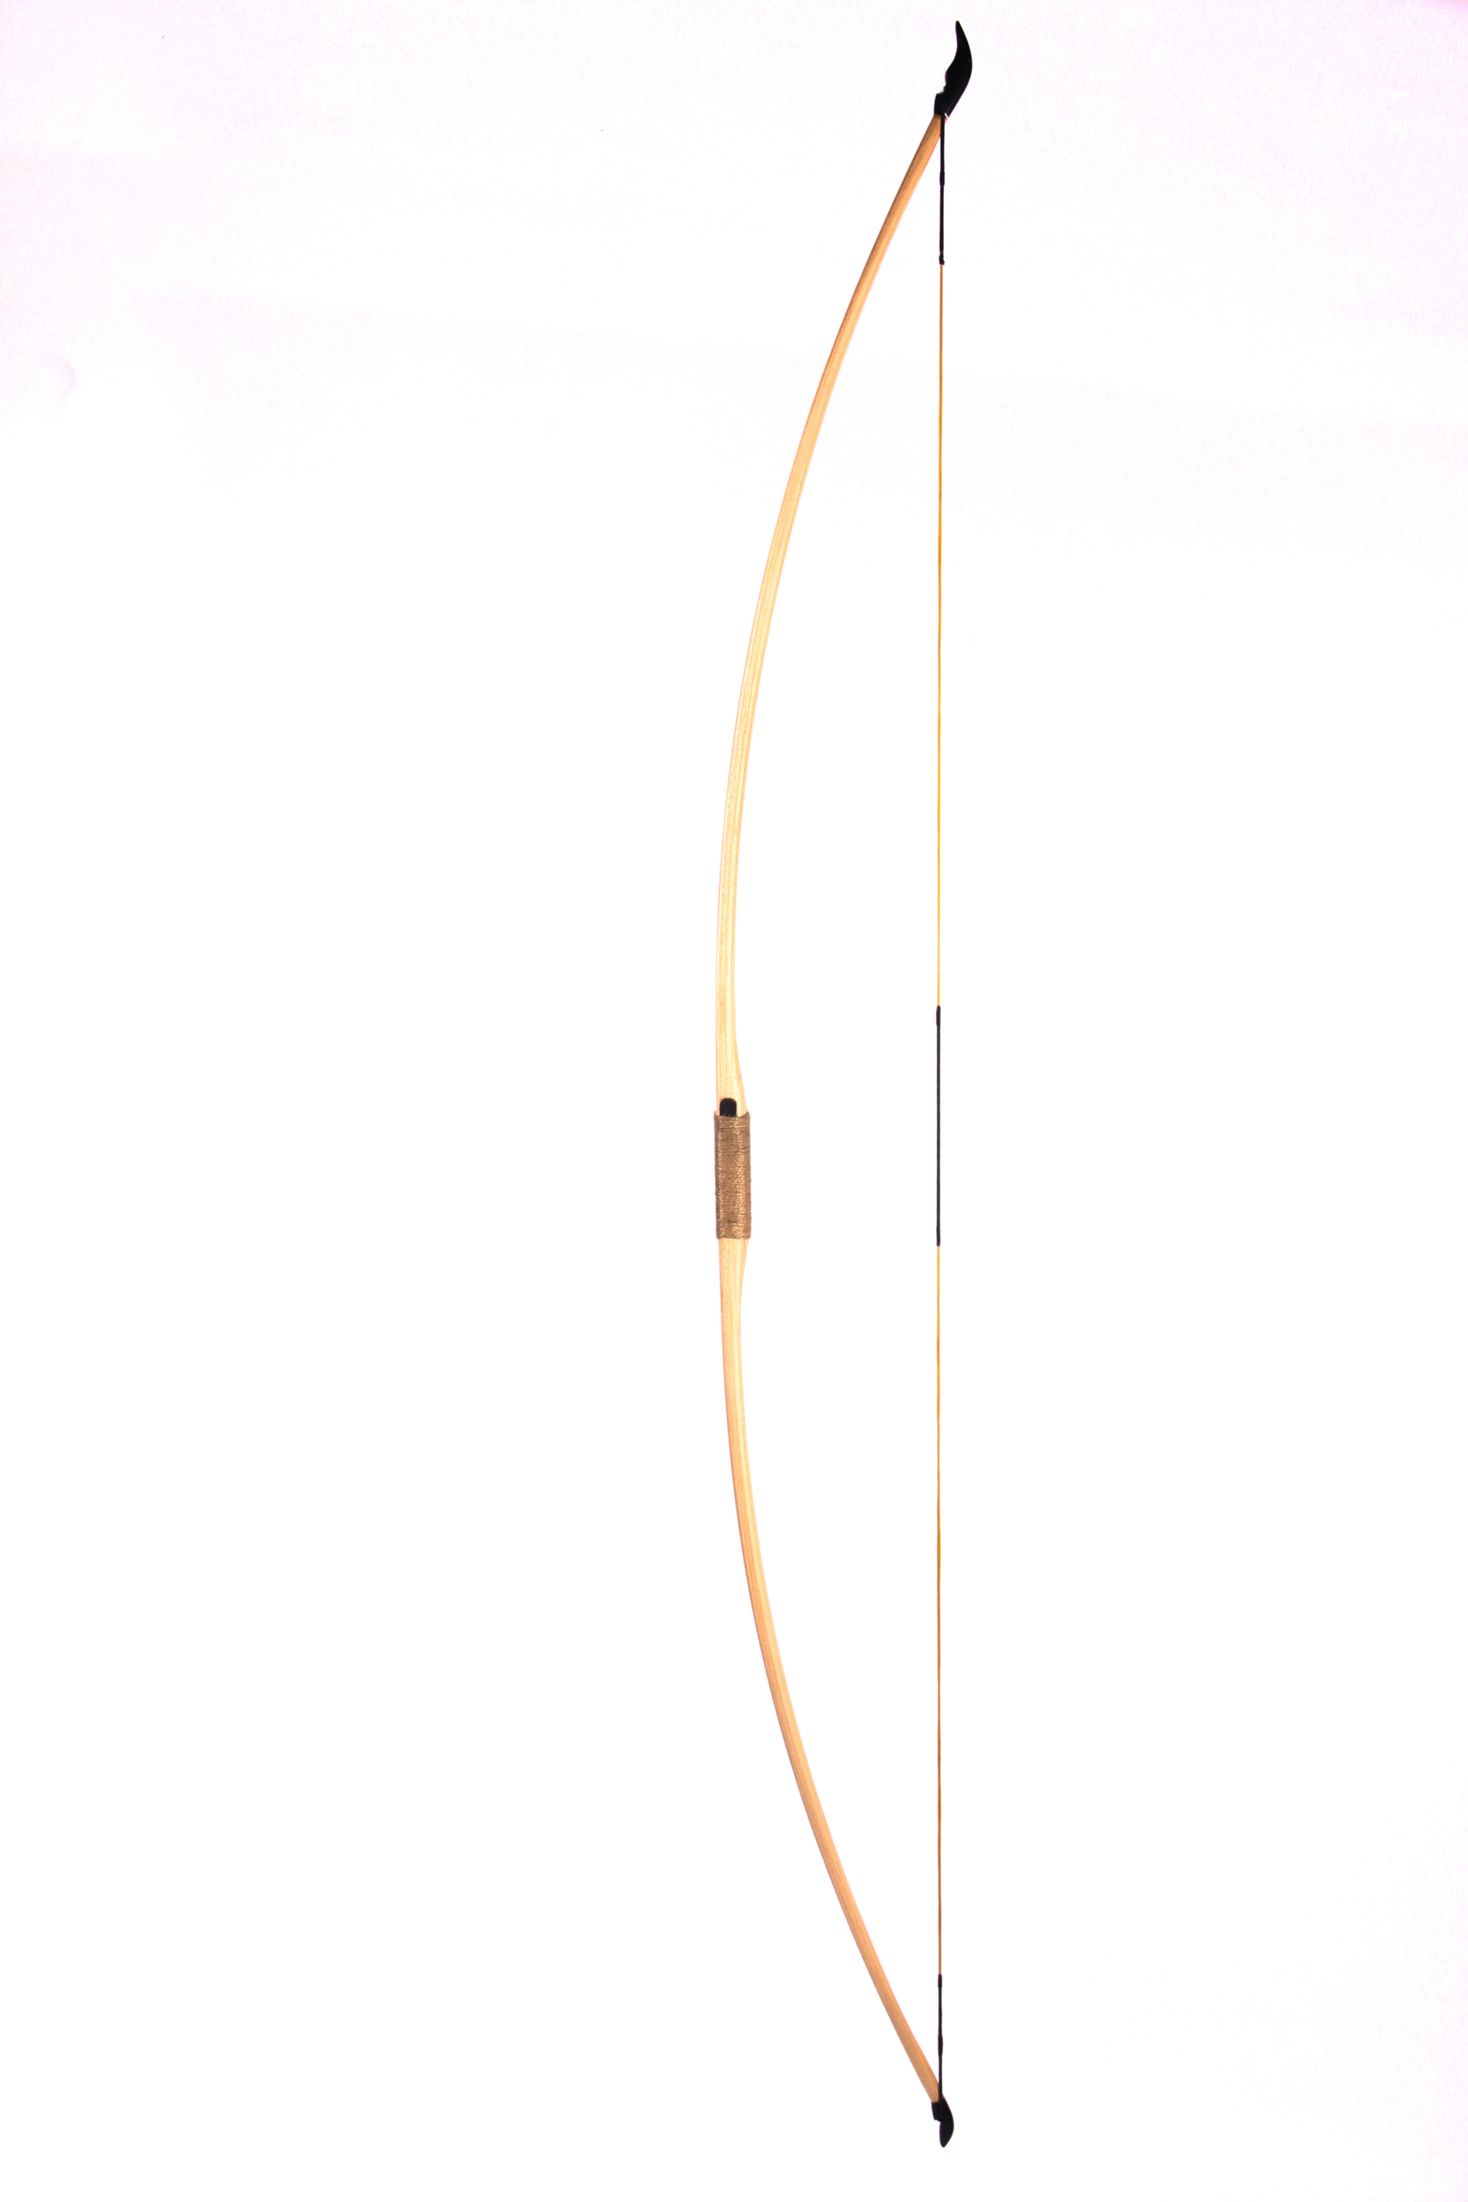 wooden bow with a taut bowstring on a white background